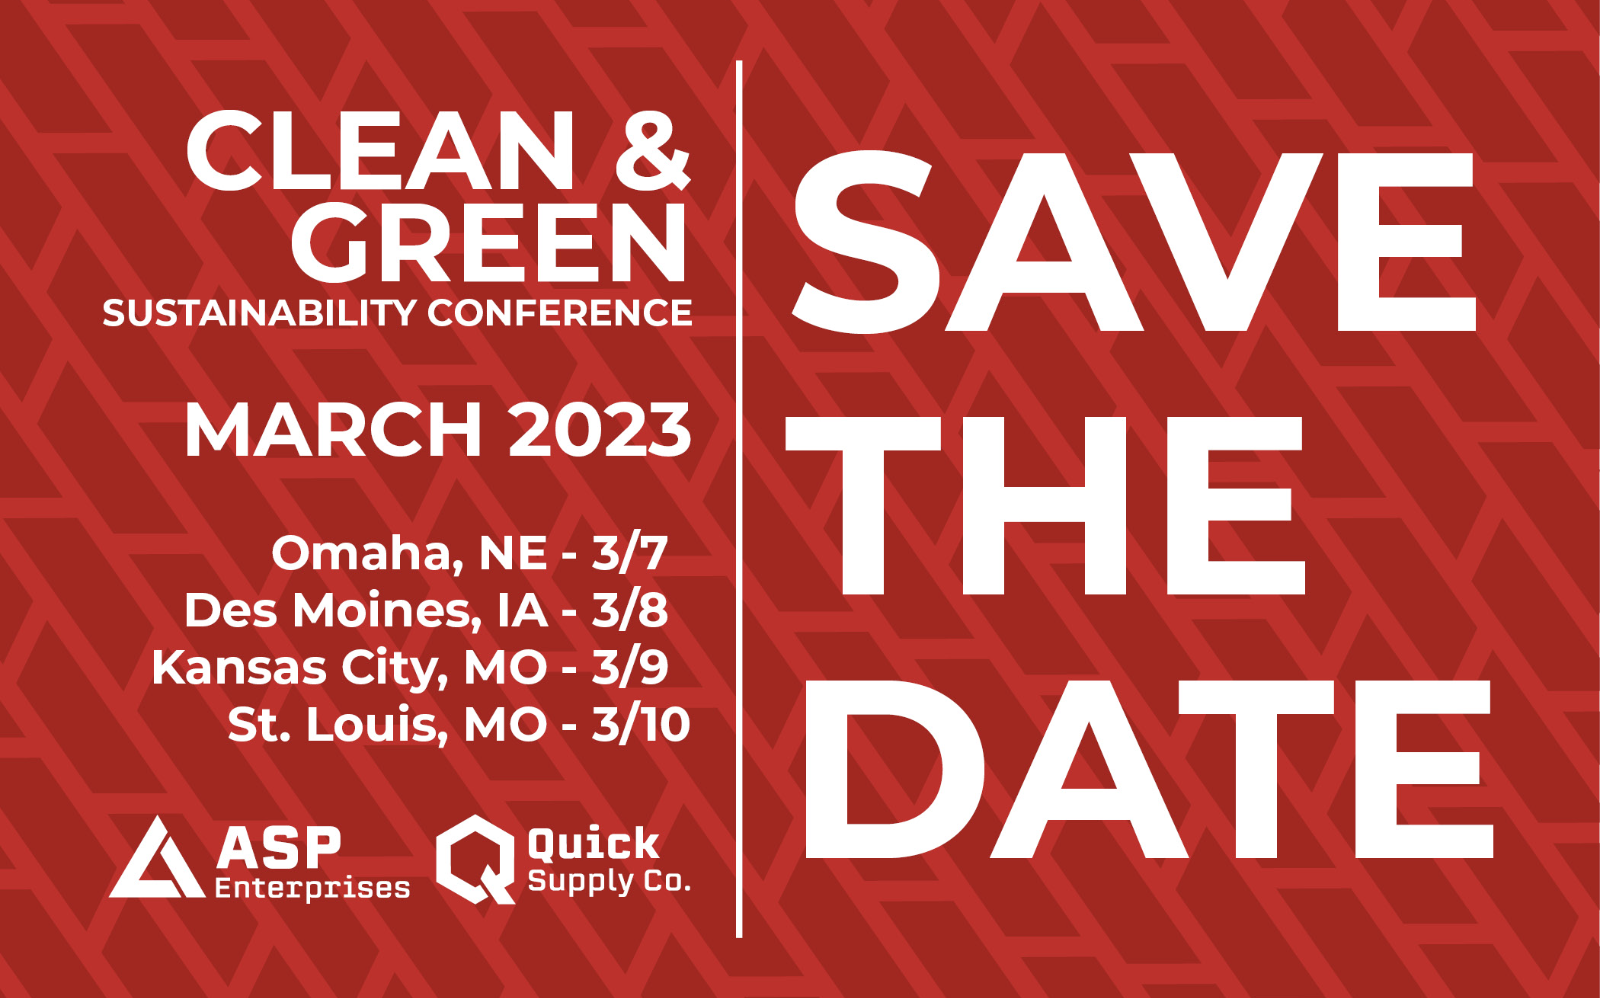 Clean & Green Save the Date 